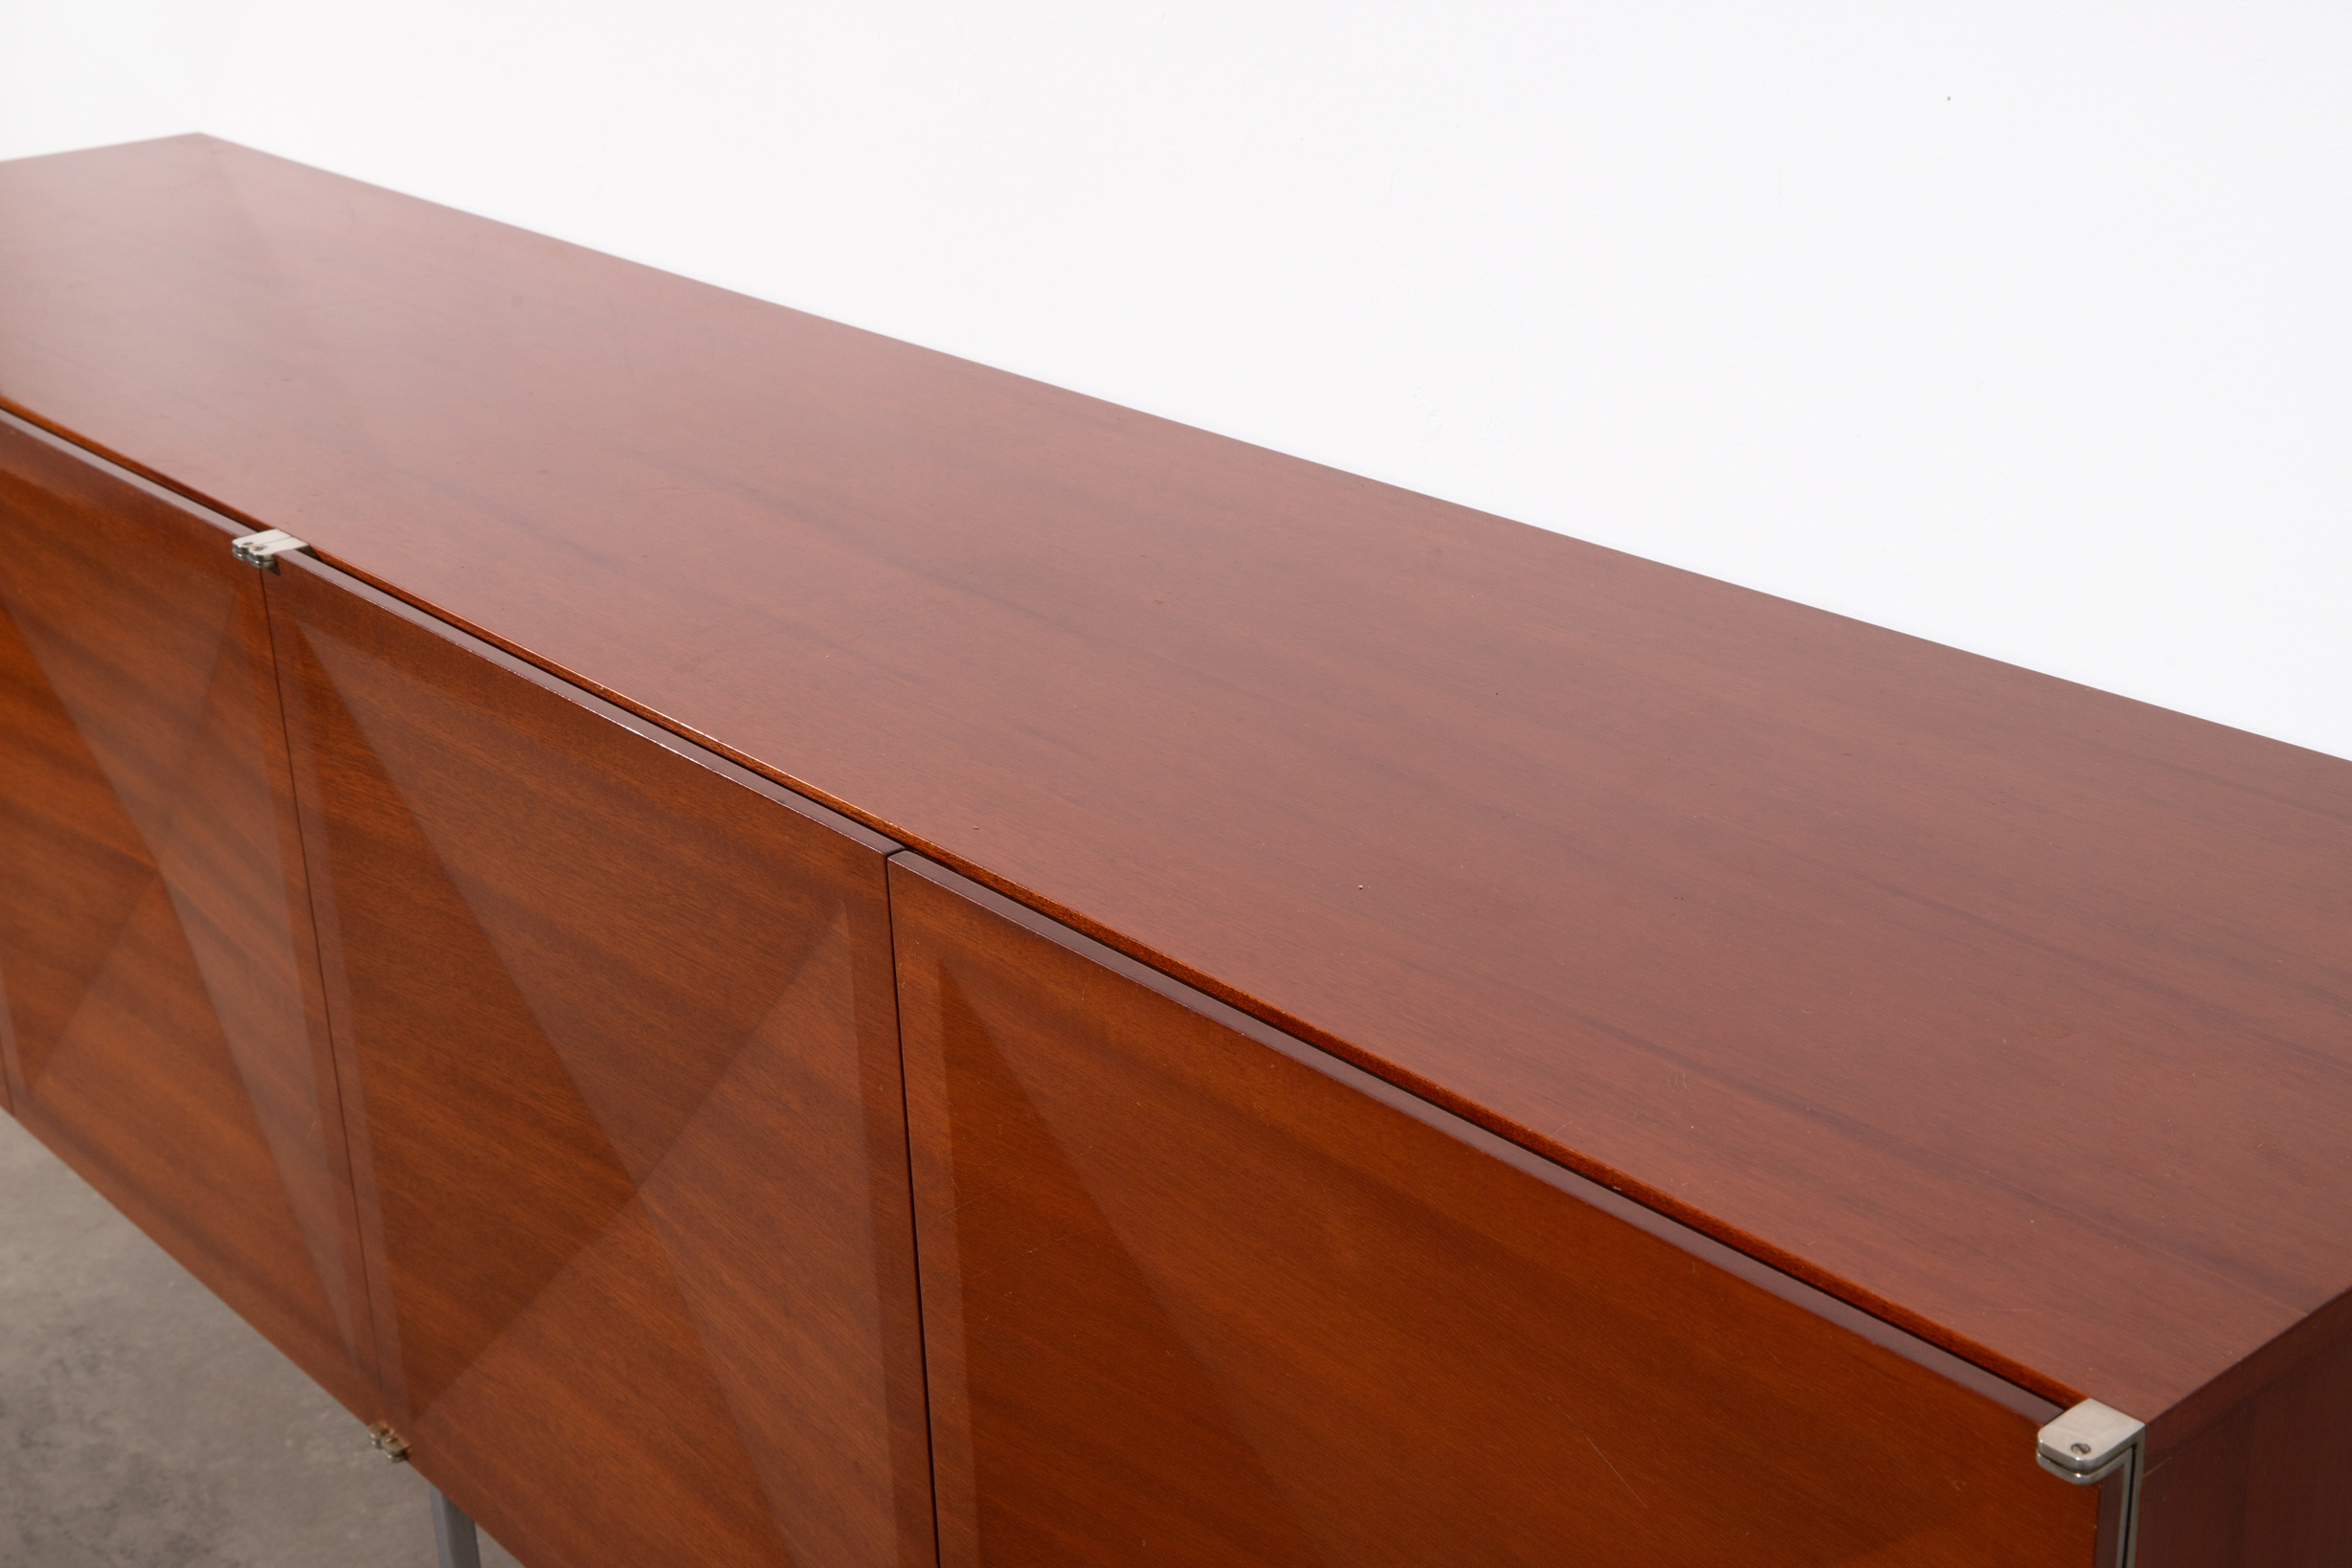 Philippon & Lecoq, Behr, Sideboard from the Diamond series - Image 7 of 7